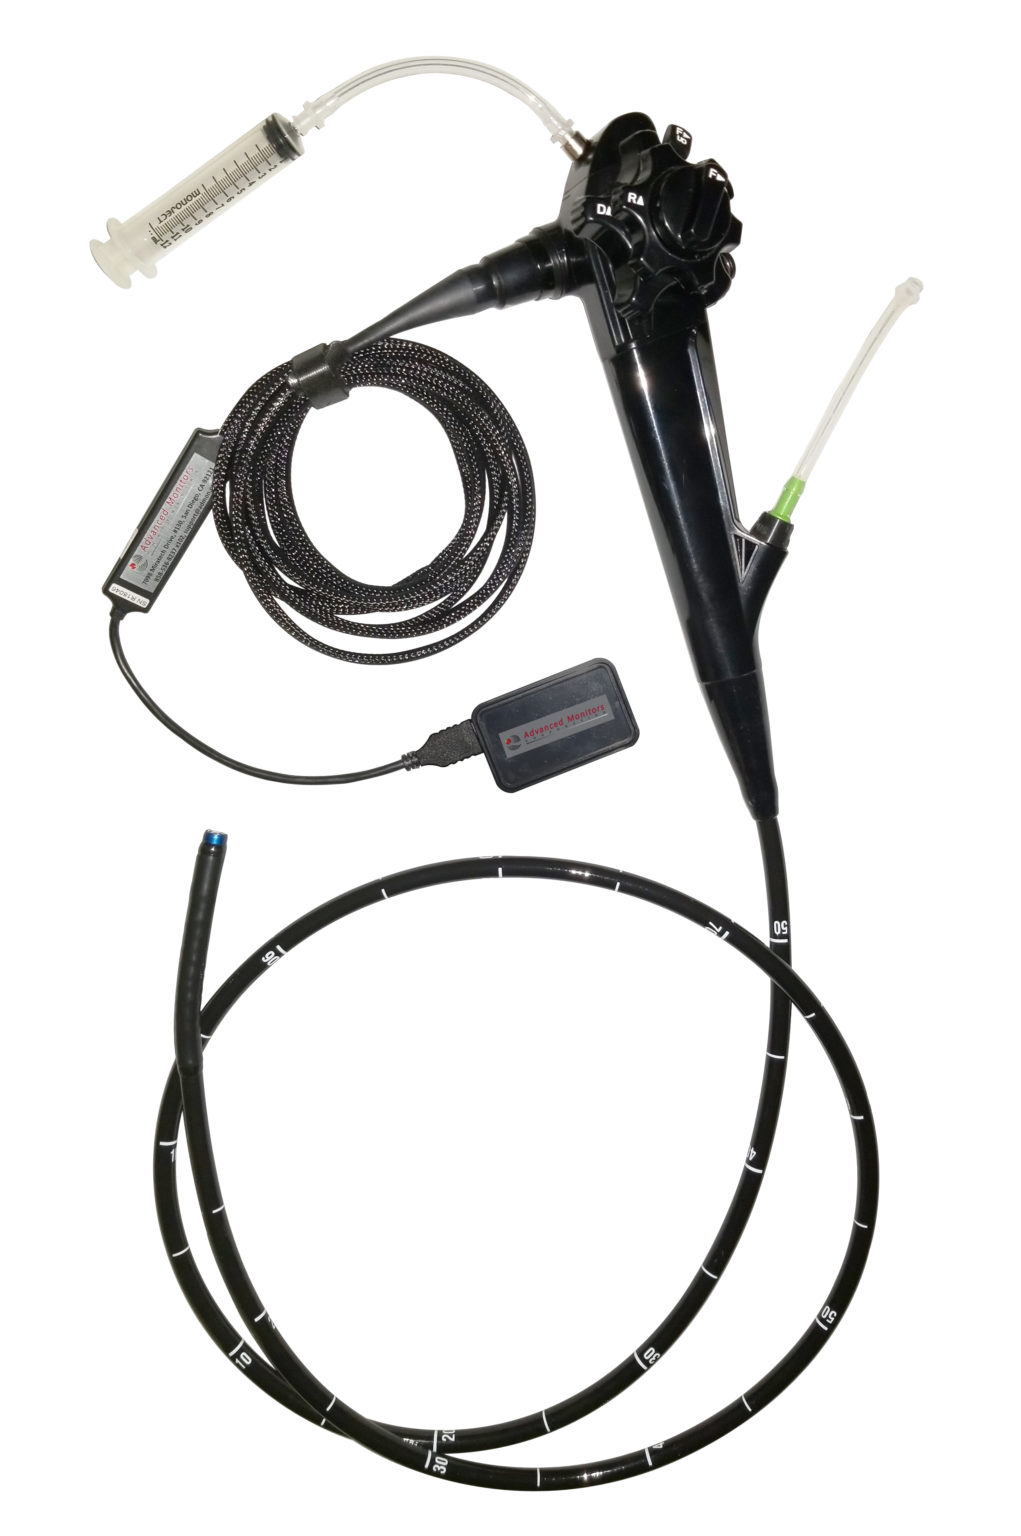 software download for potensic usb endoscope